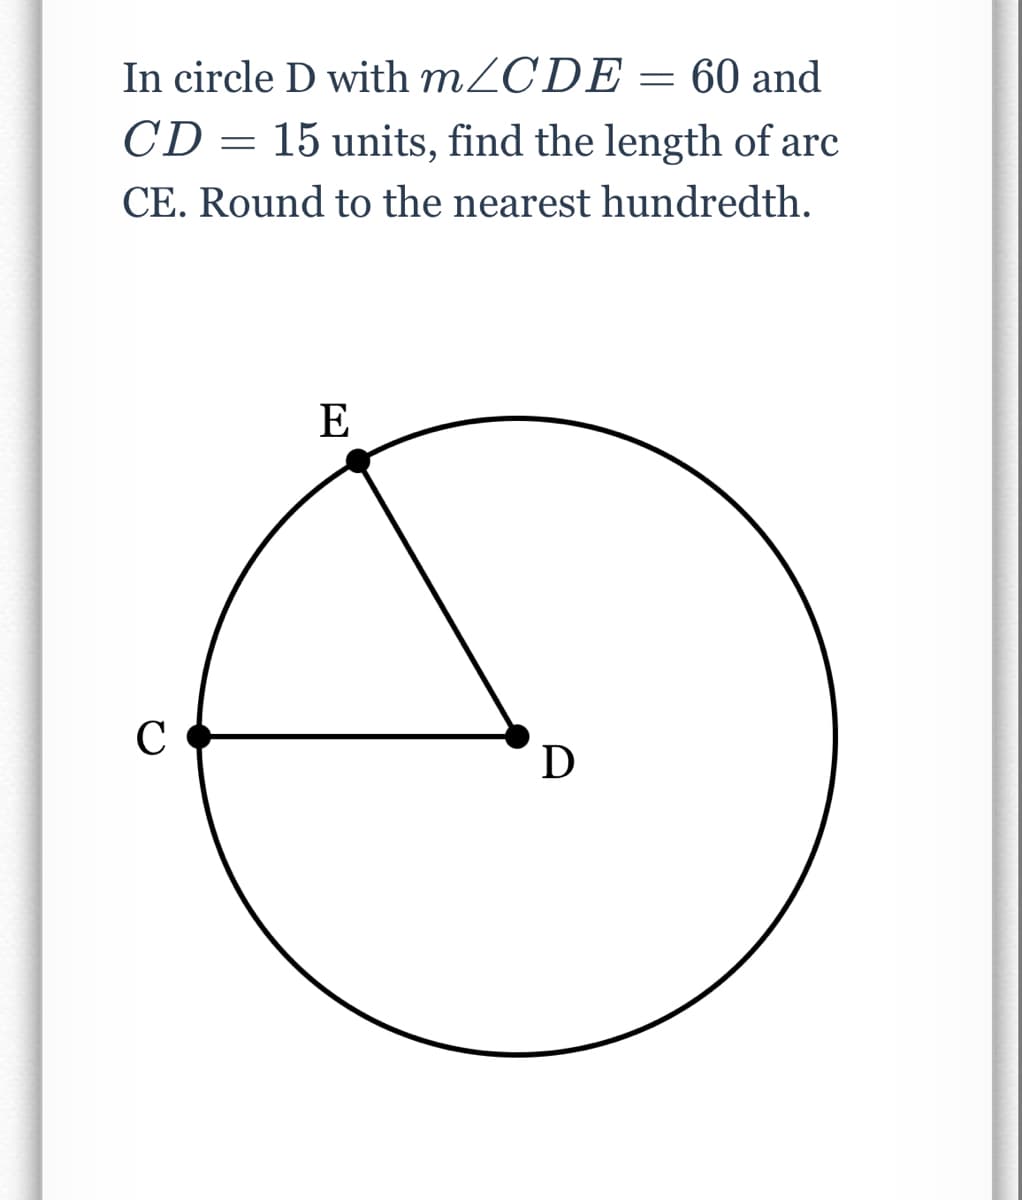 In circle D with MZCDE = 60 and
CD = 15 units, find the length of arc
CE. Round to the nearest hundredth.
E
C
D
